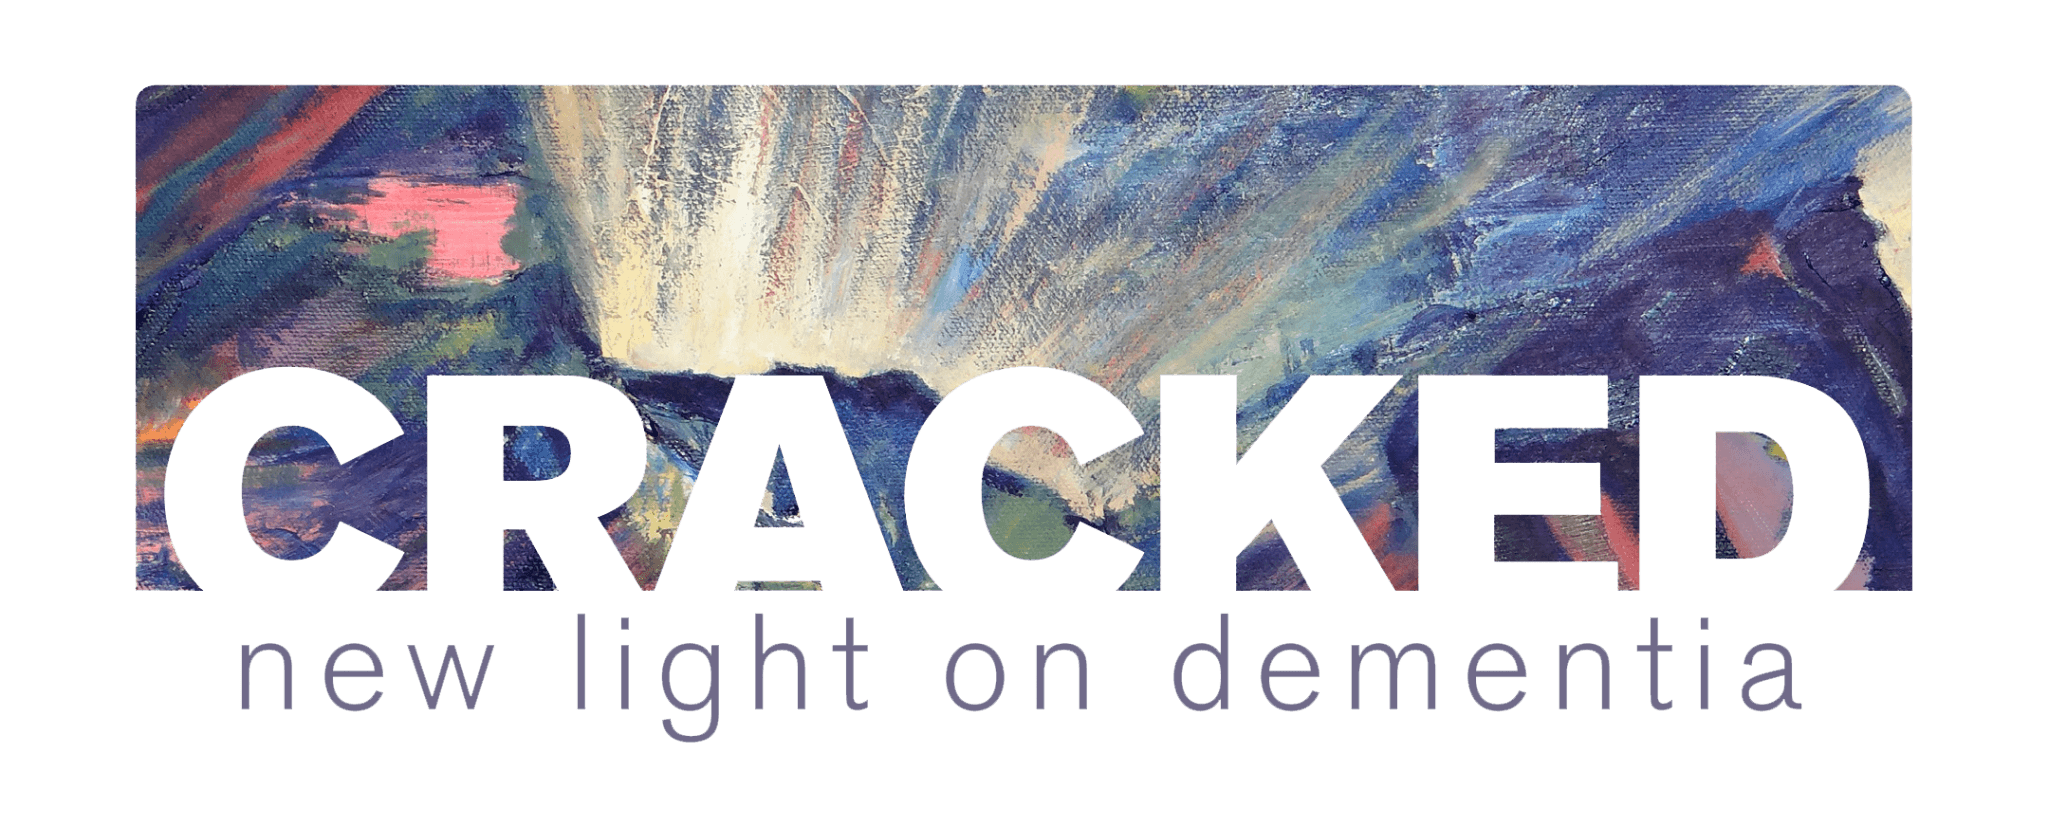 Cracked.com Logo - Cracked: New Light on Dementia | Learn About our Performance